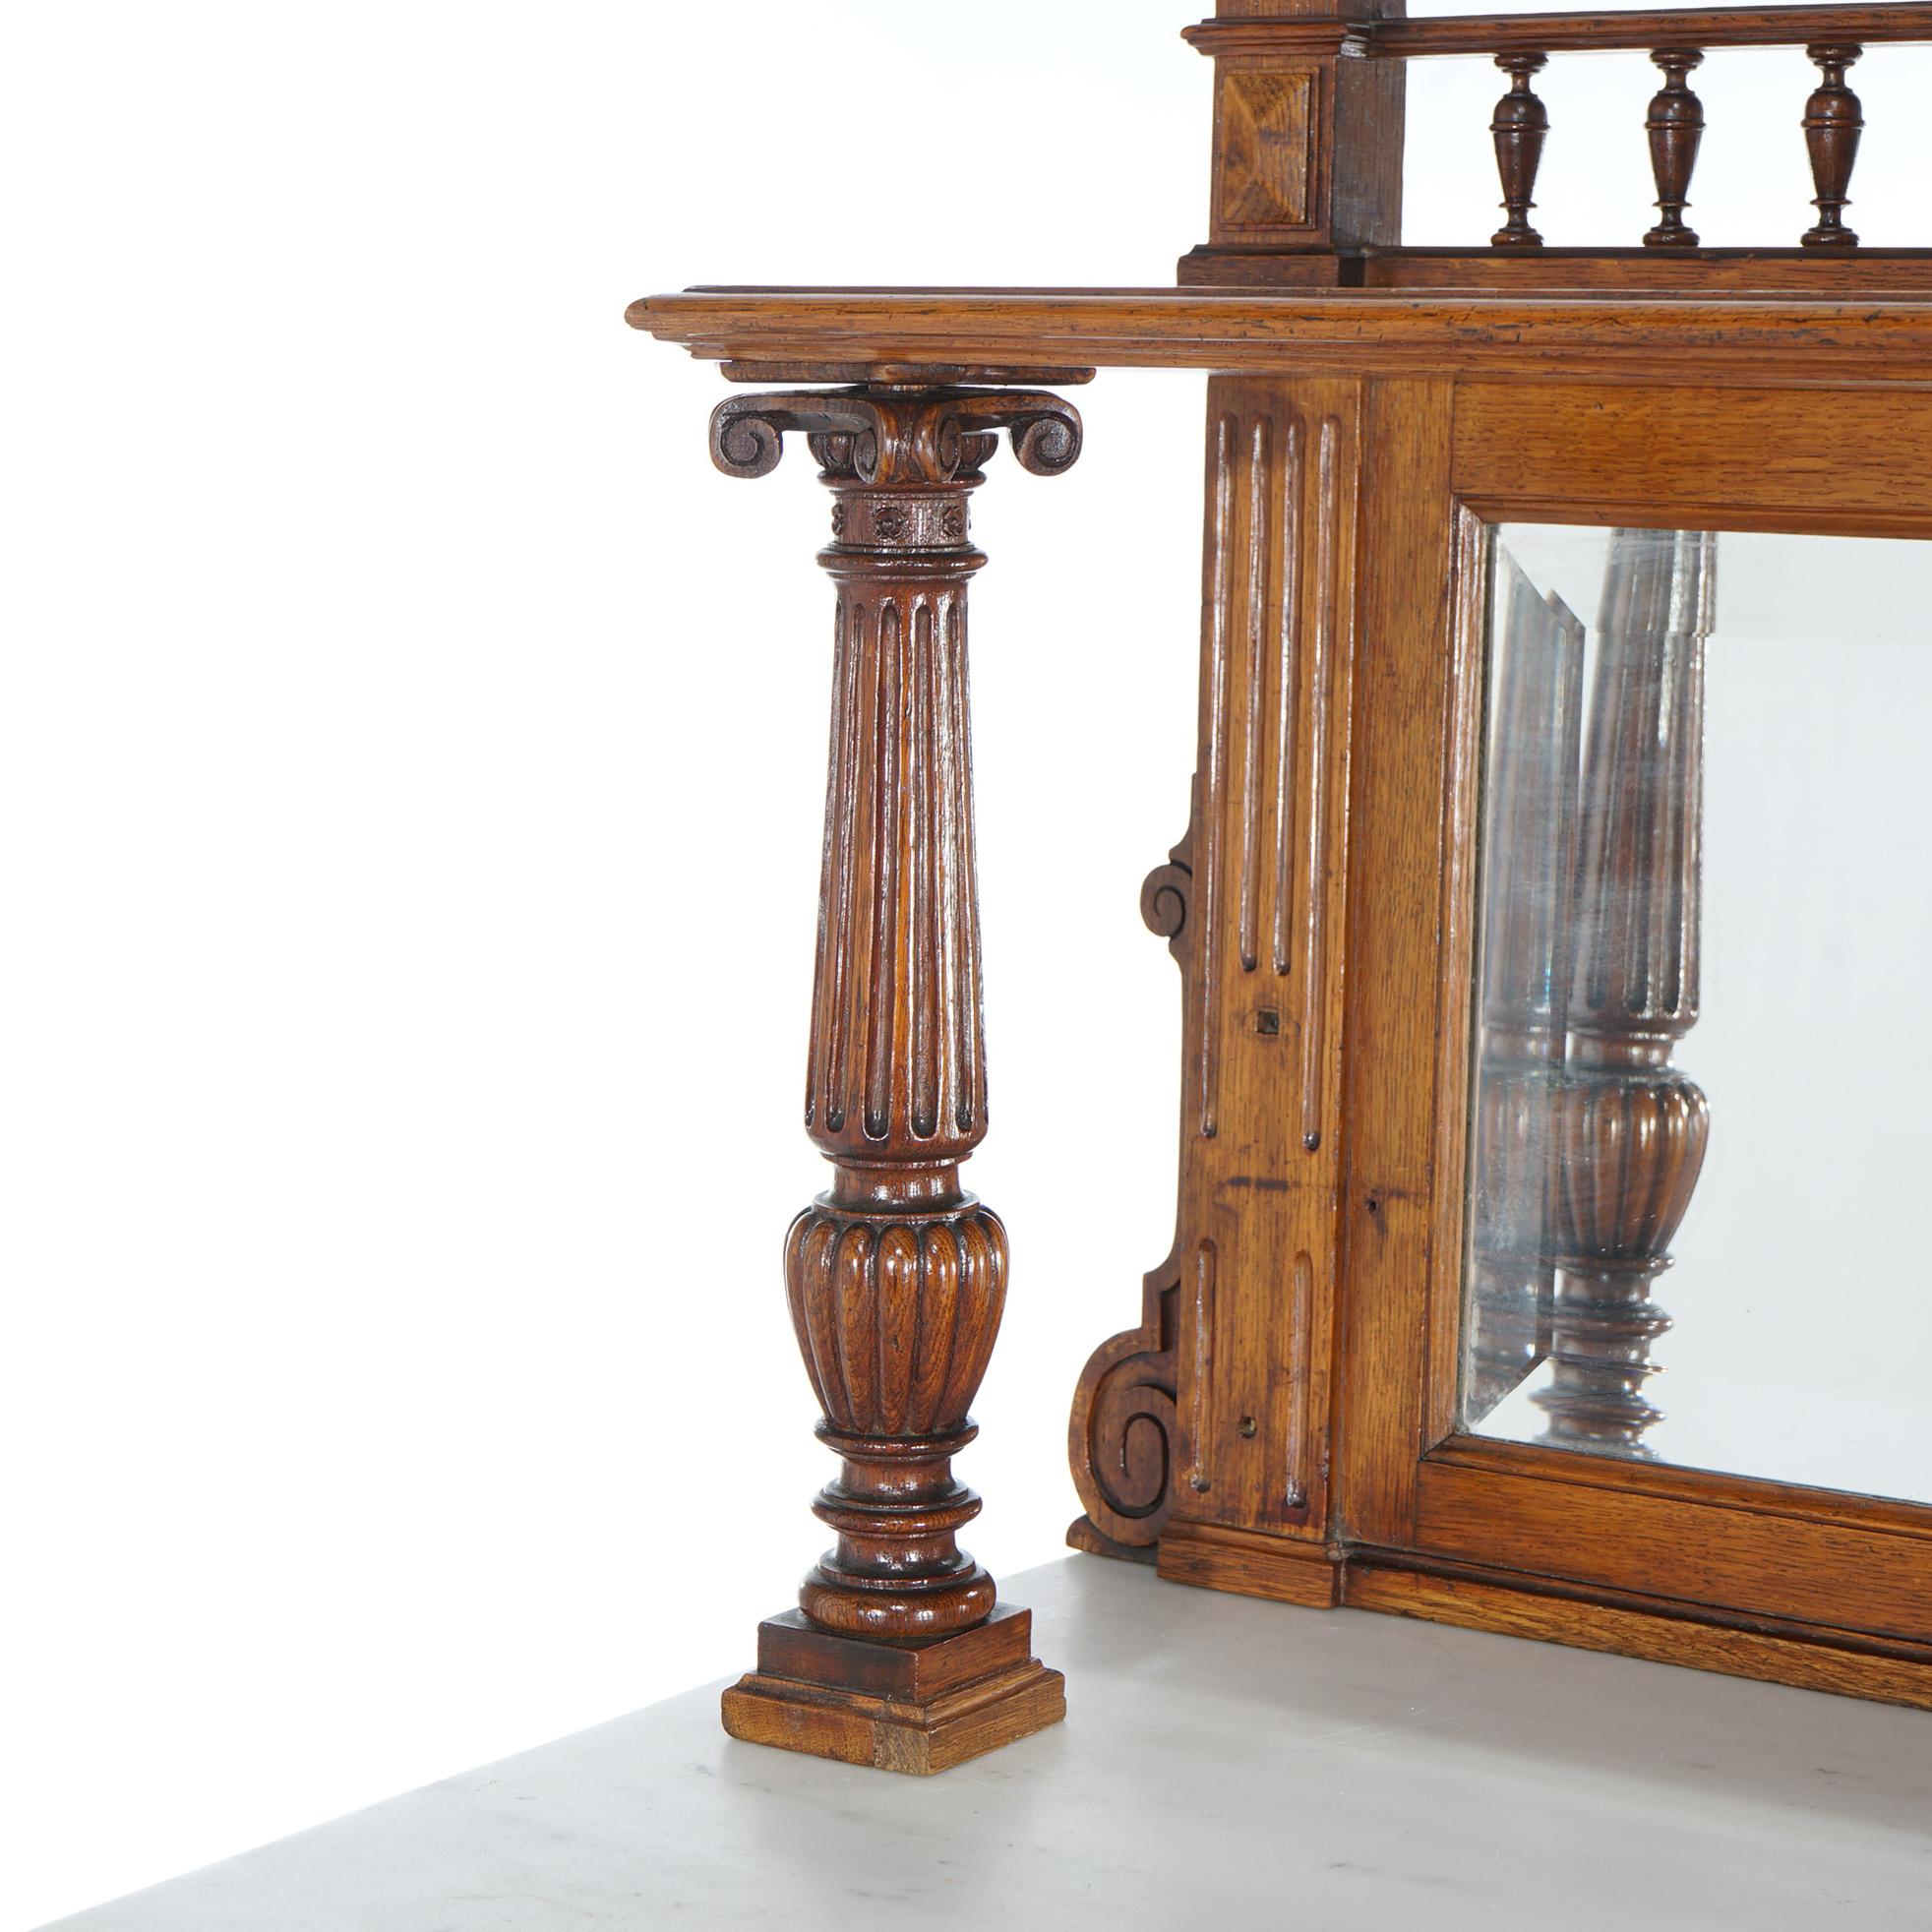 Antique Oak Marble Top Server with Mirrored Back Splash & Spindled Rail C1900 For Sale 8